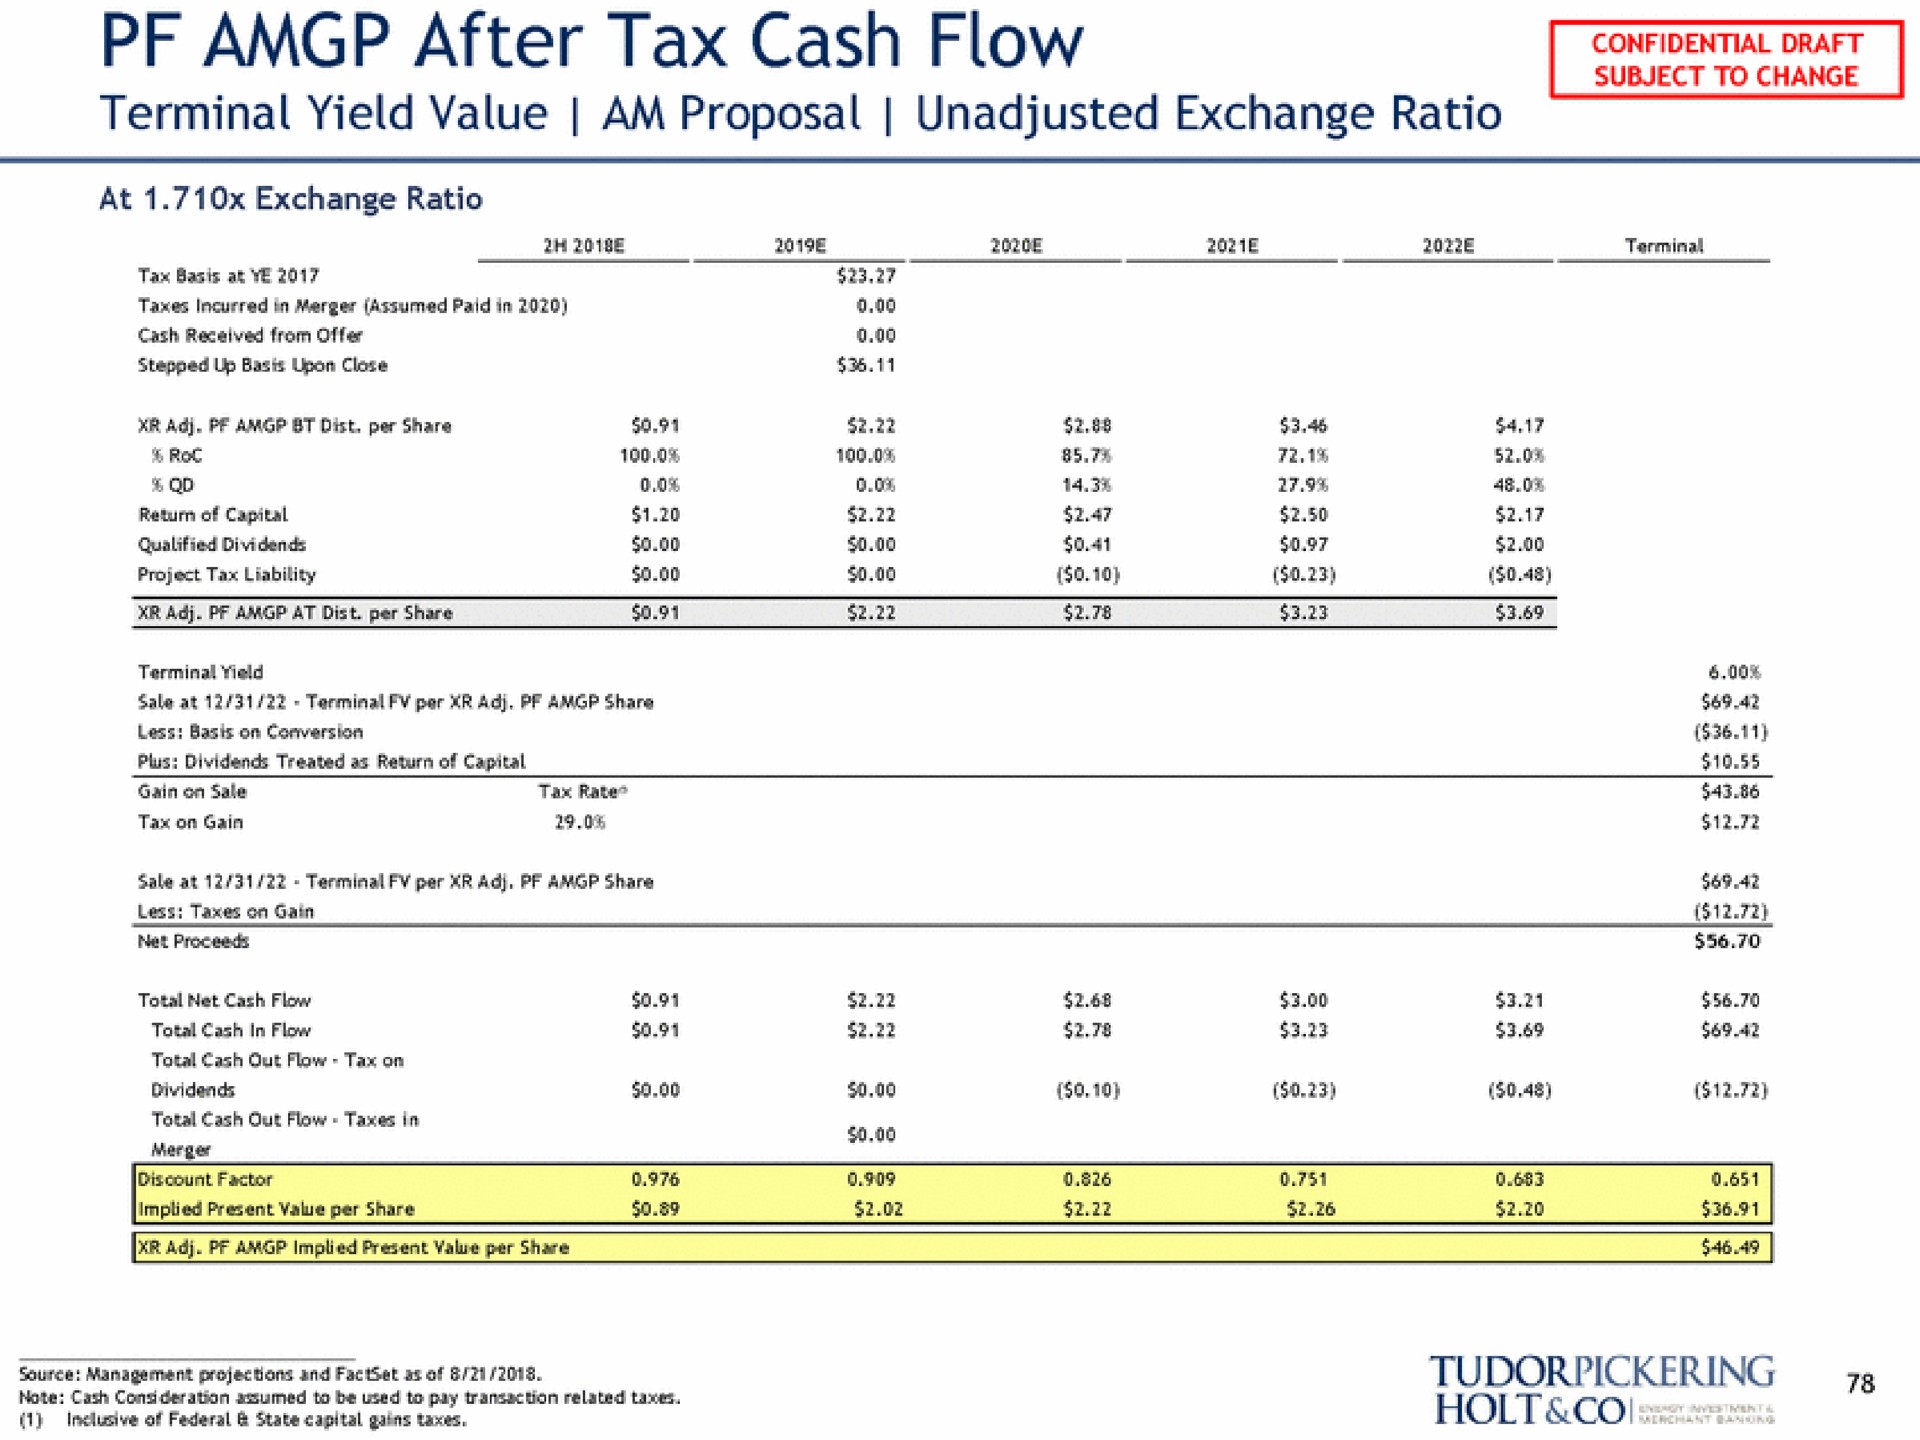 after tax cash flow terminal yield value am proposal unadjusted exchange ratio | Tudor, Pickering, Holt & Co